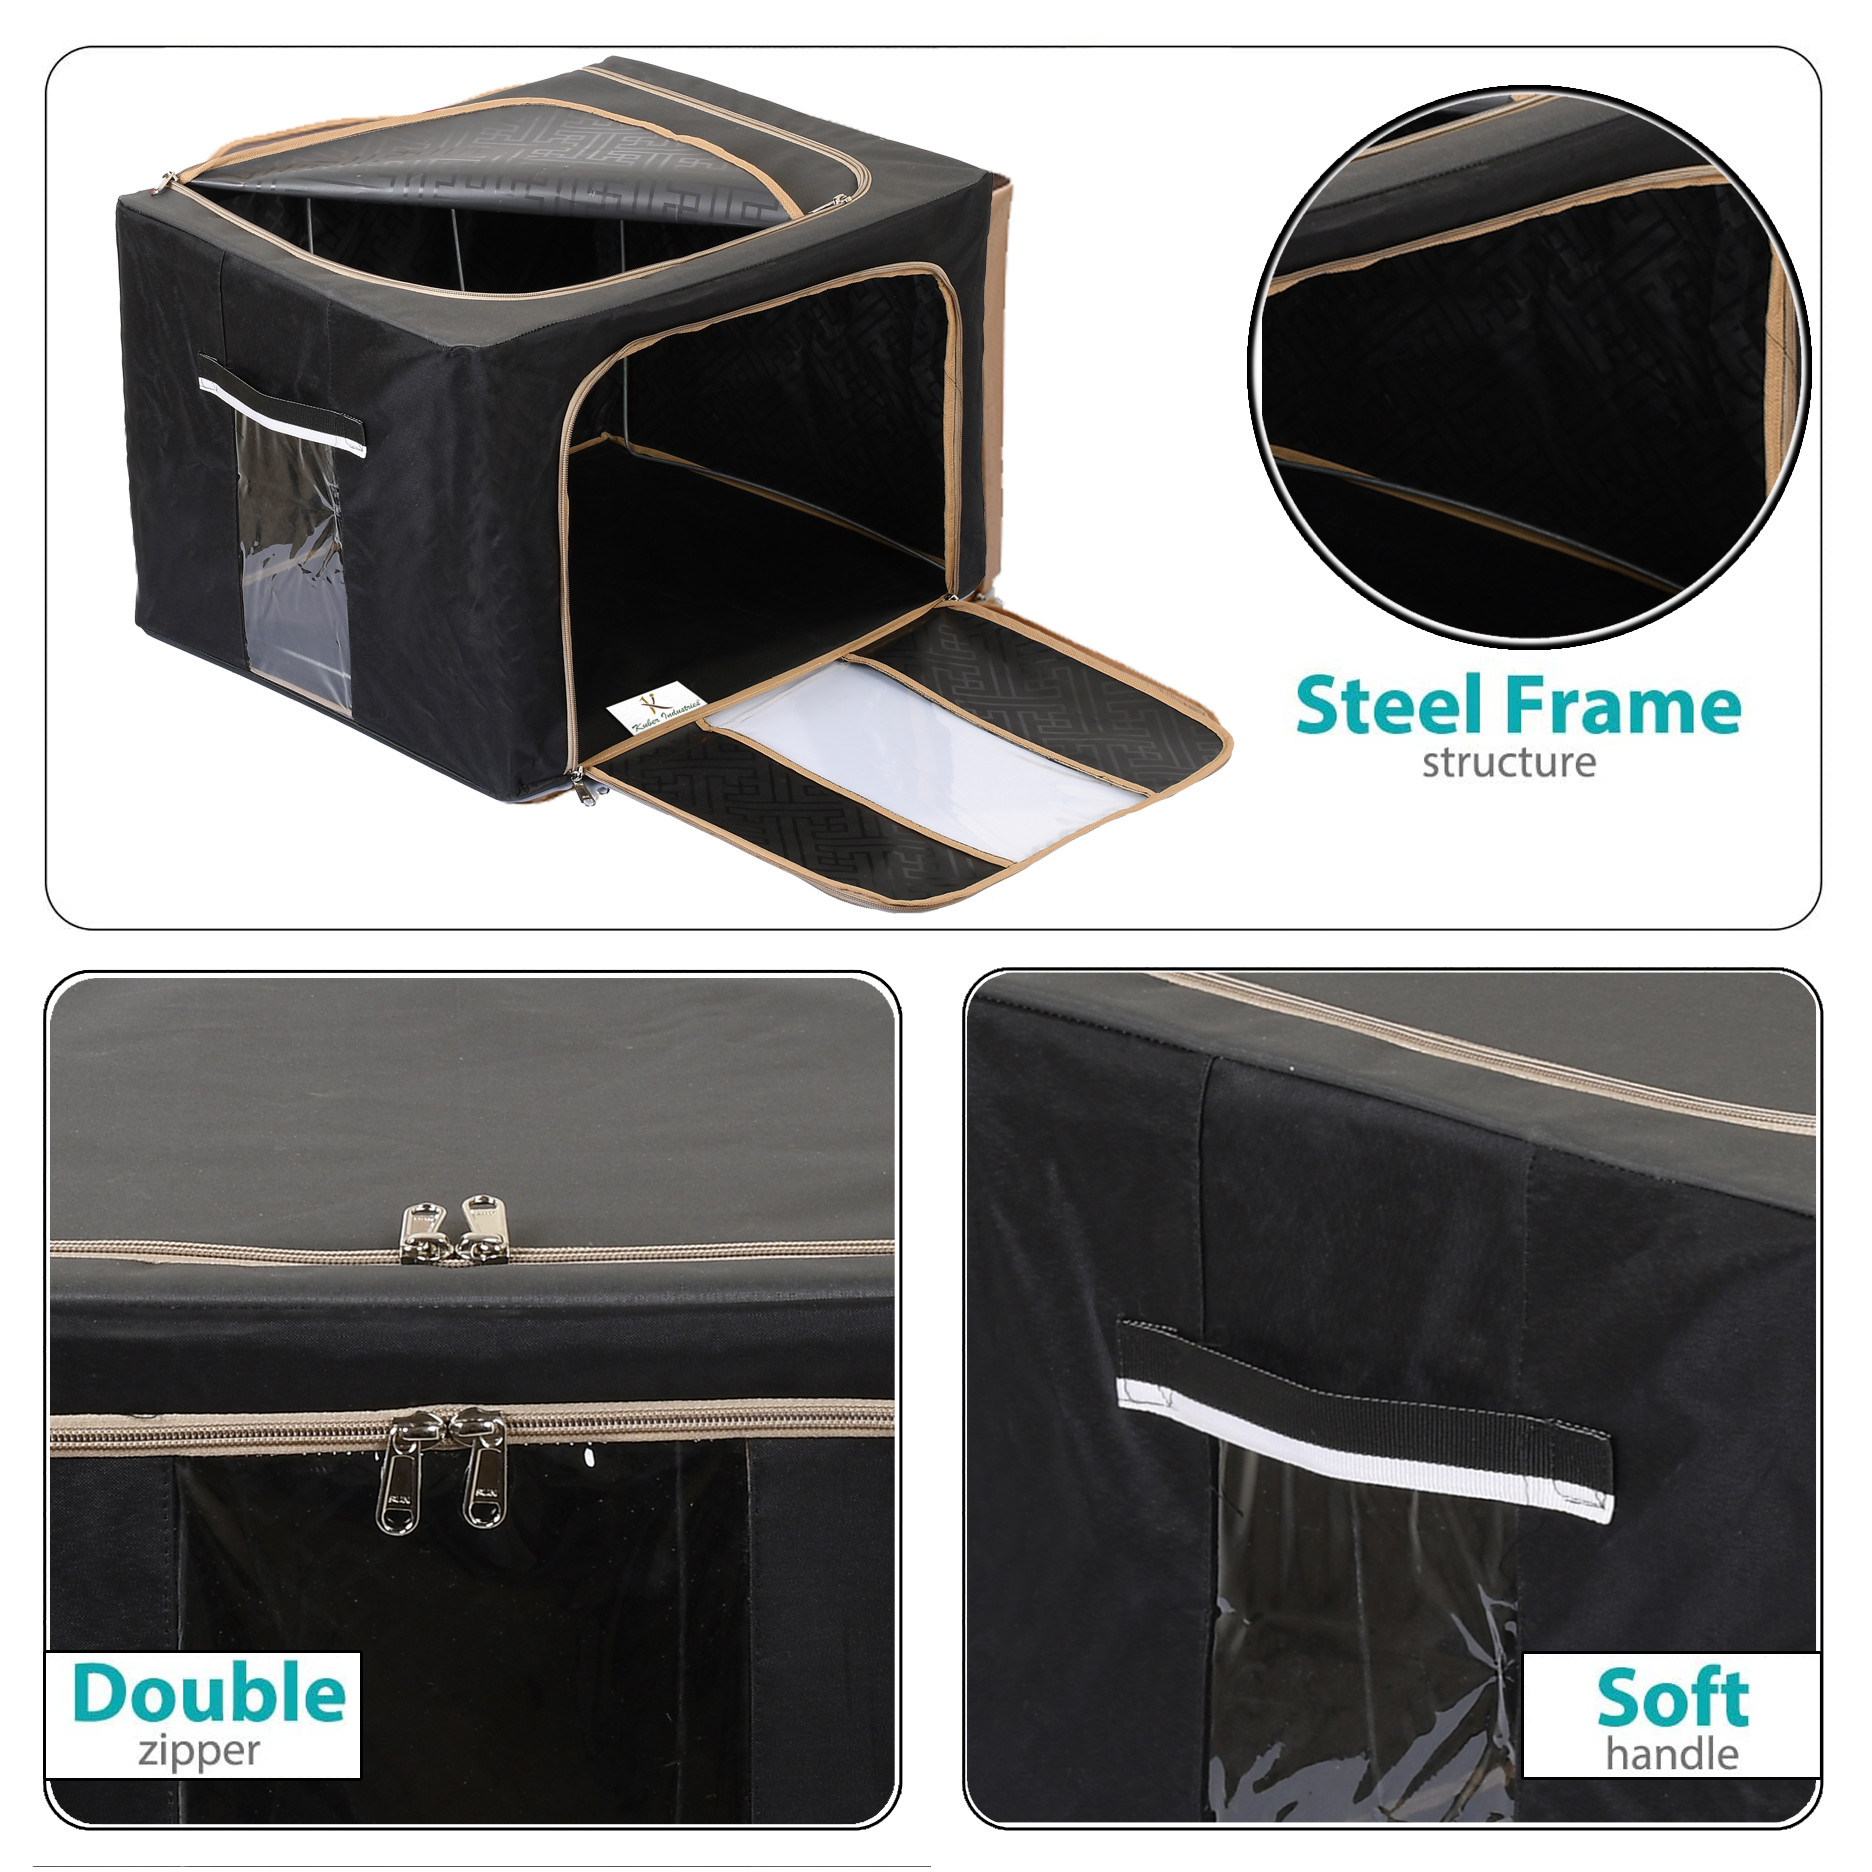 Kuber Industries Steel Frame Storage Box/Organizer For Clothing, Blankets, Bedding With Clear Window, 24Ltr. (Black & Grey)-44KM0289